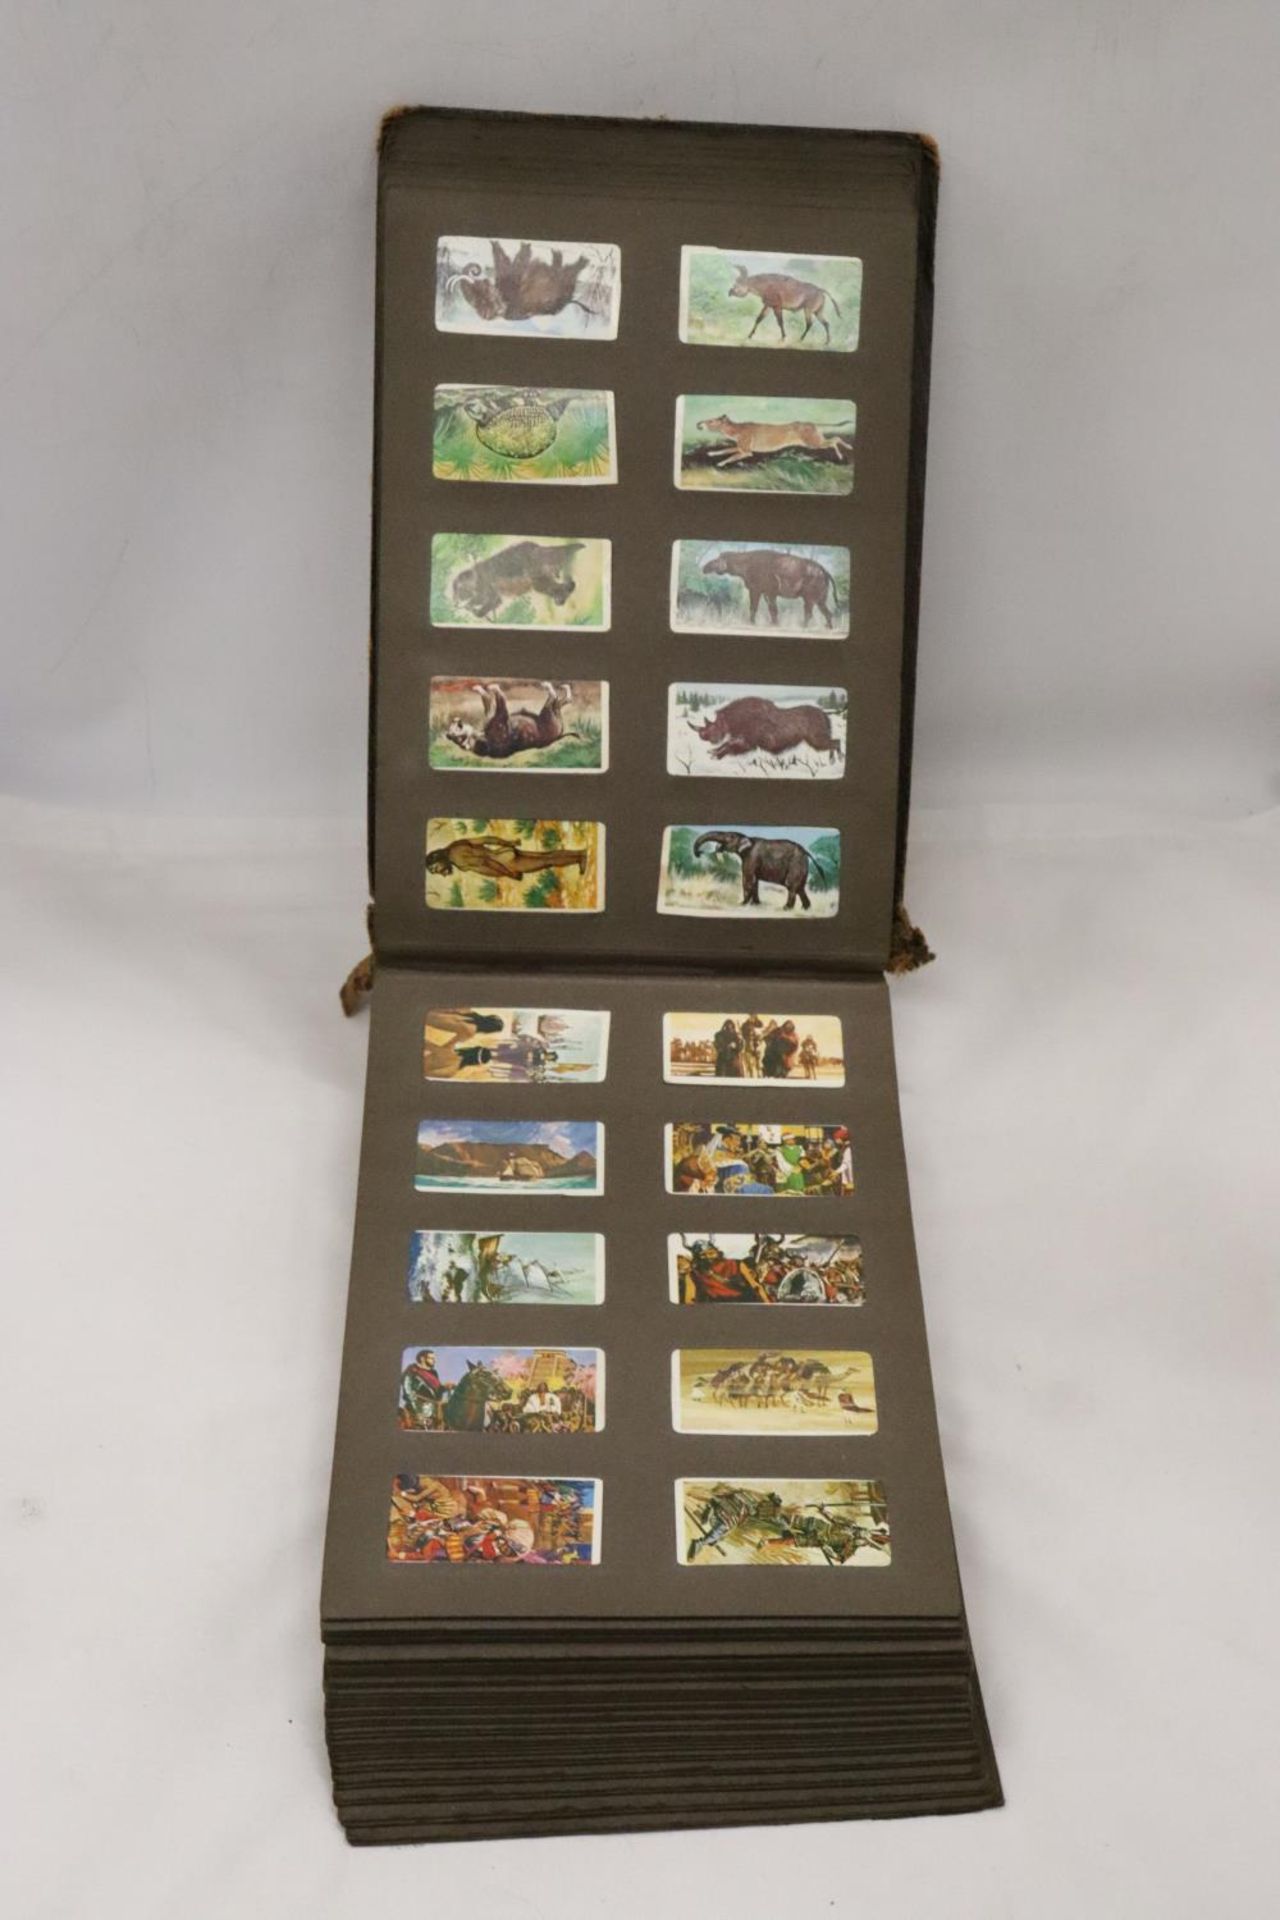 AN ALBUM CONTAINING A COLLECTION OF CIGARETTE CARDS - Image 5 of 6